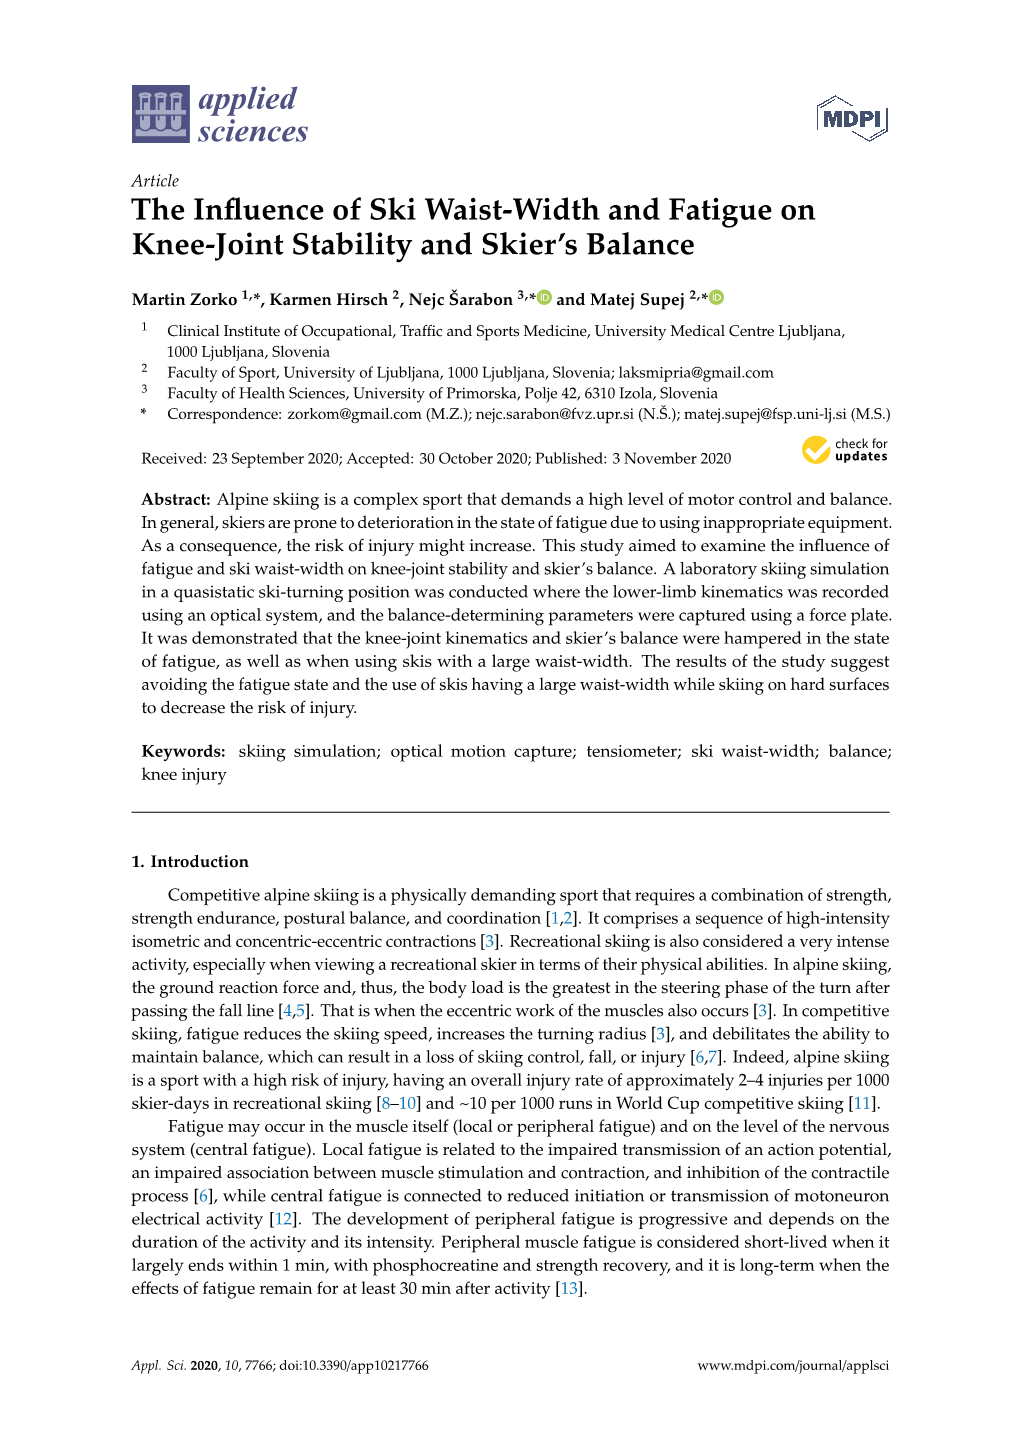 The Influence of Ski Waist-Width and Fatigue on Knee-Joint Stability And